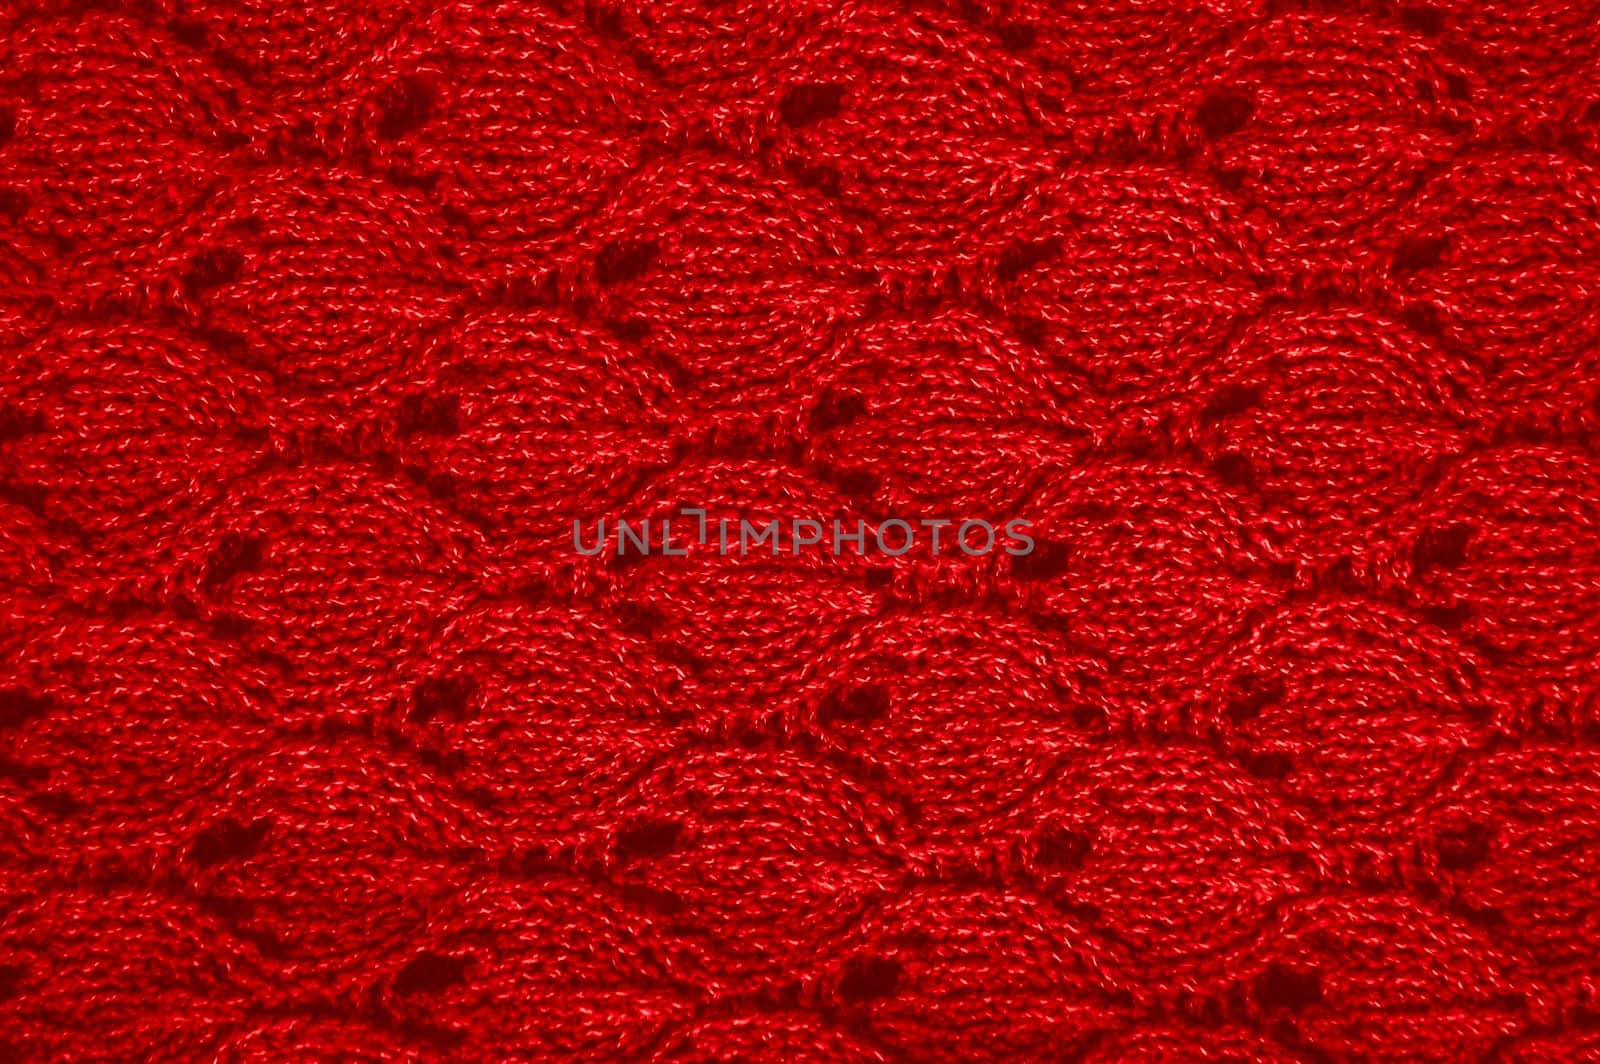 Detail Knitted Fabric. Vintage Woven Texture. Soft Knitwear Holiday Background. Knitted Wool. Red Closeup Thread. Scandinavian Warm Jumper. Structure Print Garment. Fiber Abstract Wool.